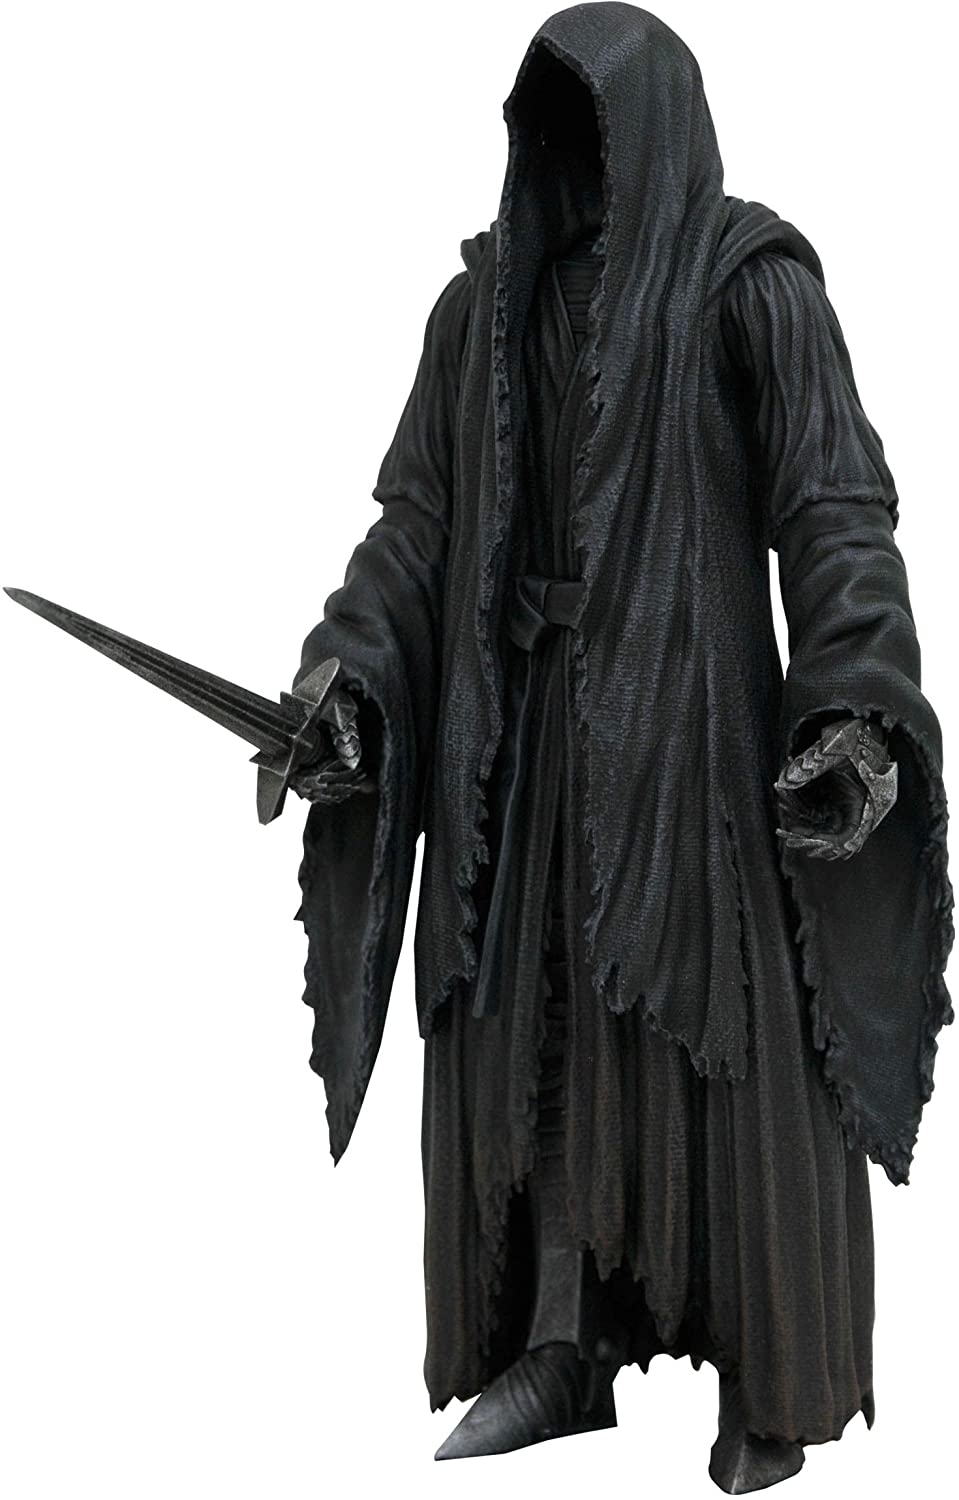 Diamond Select Toys The Lord of The Rings Ringwraith Action Figure